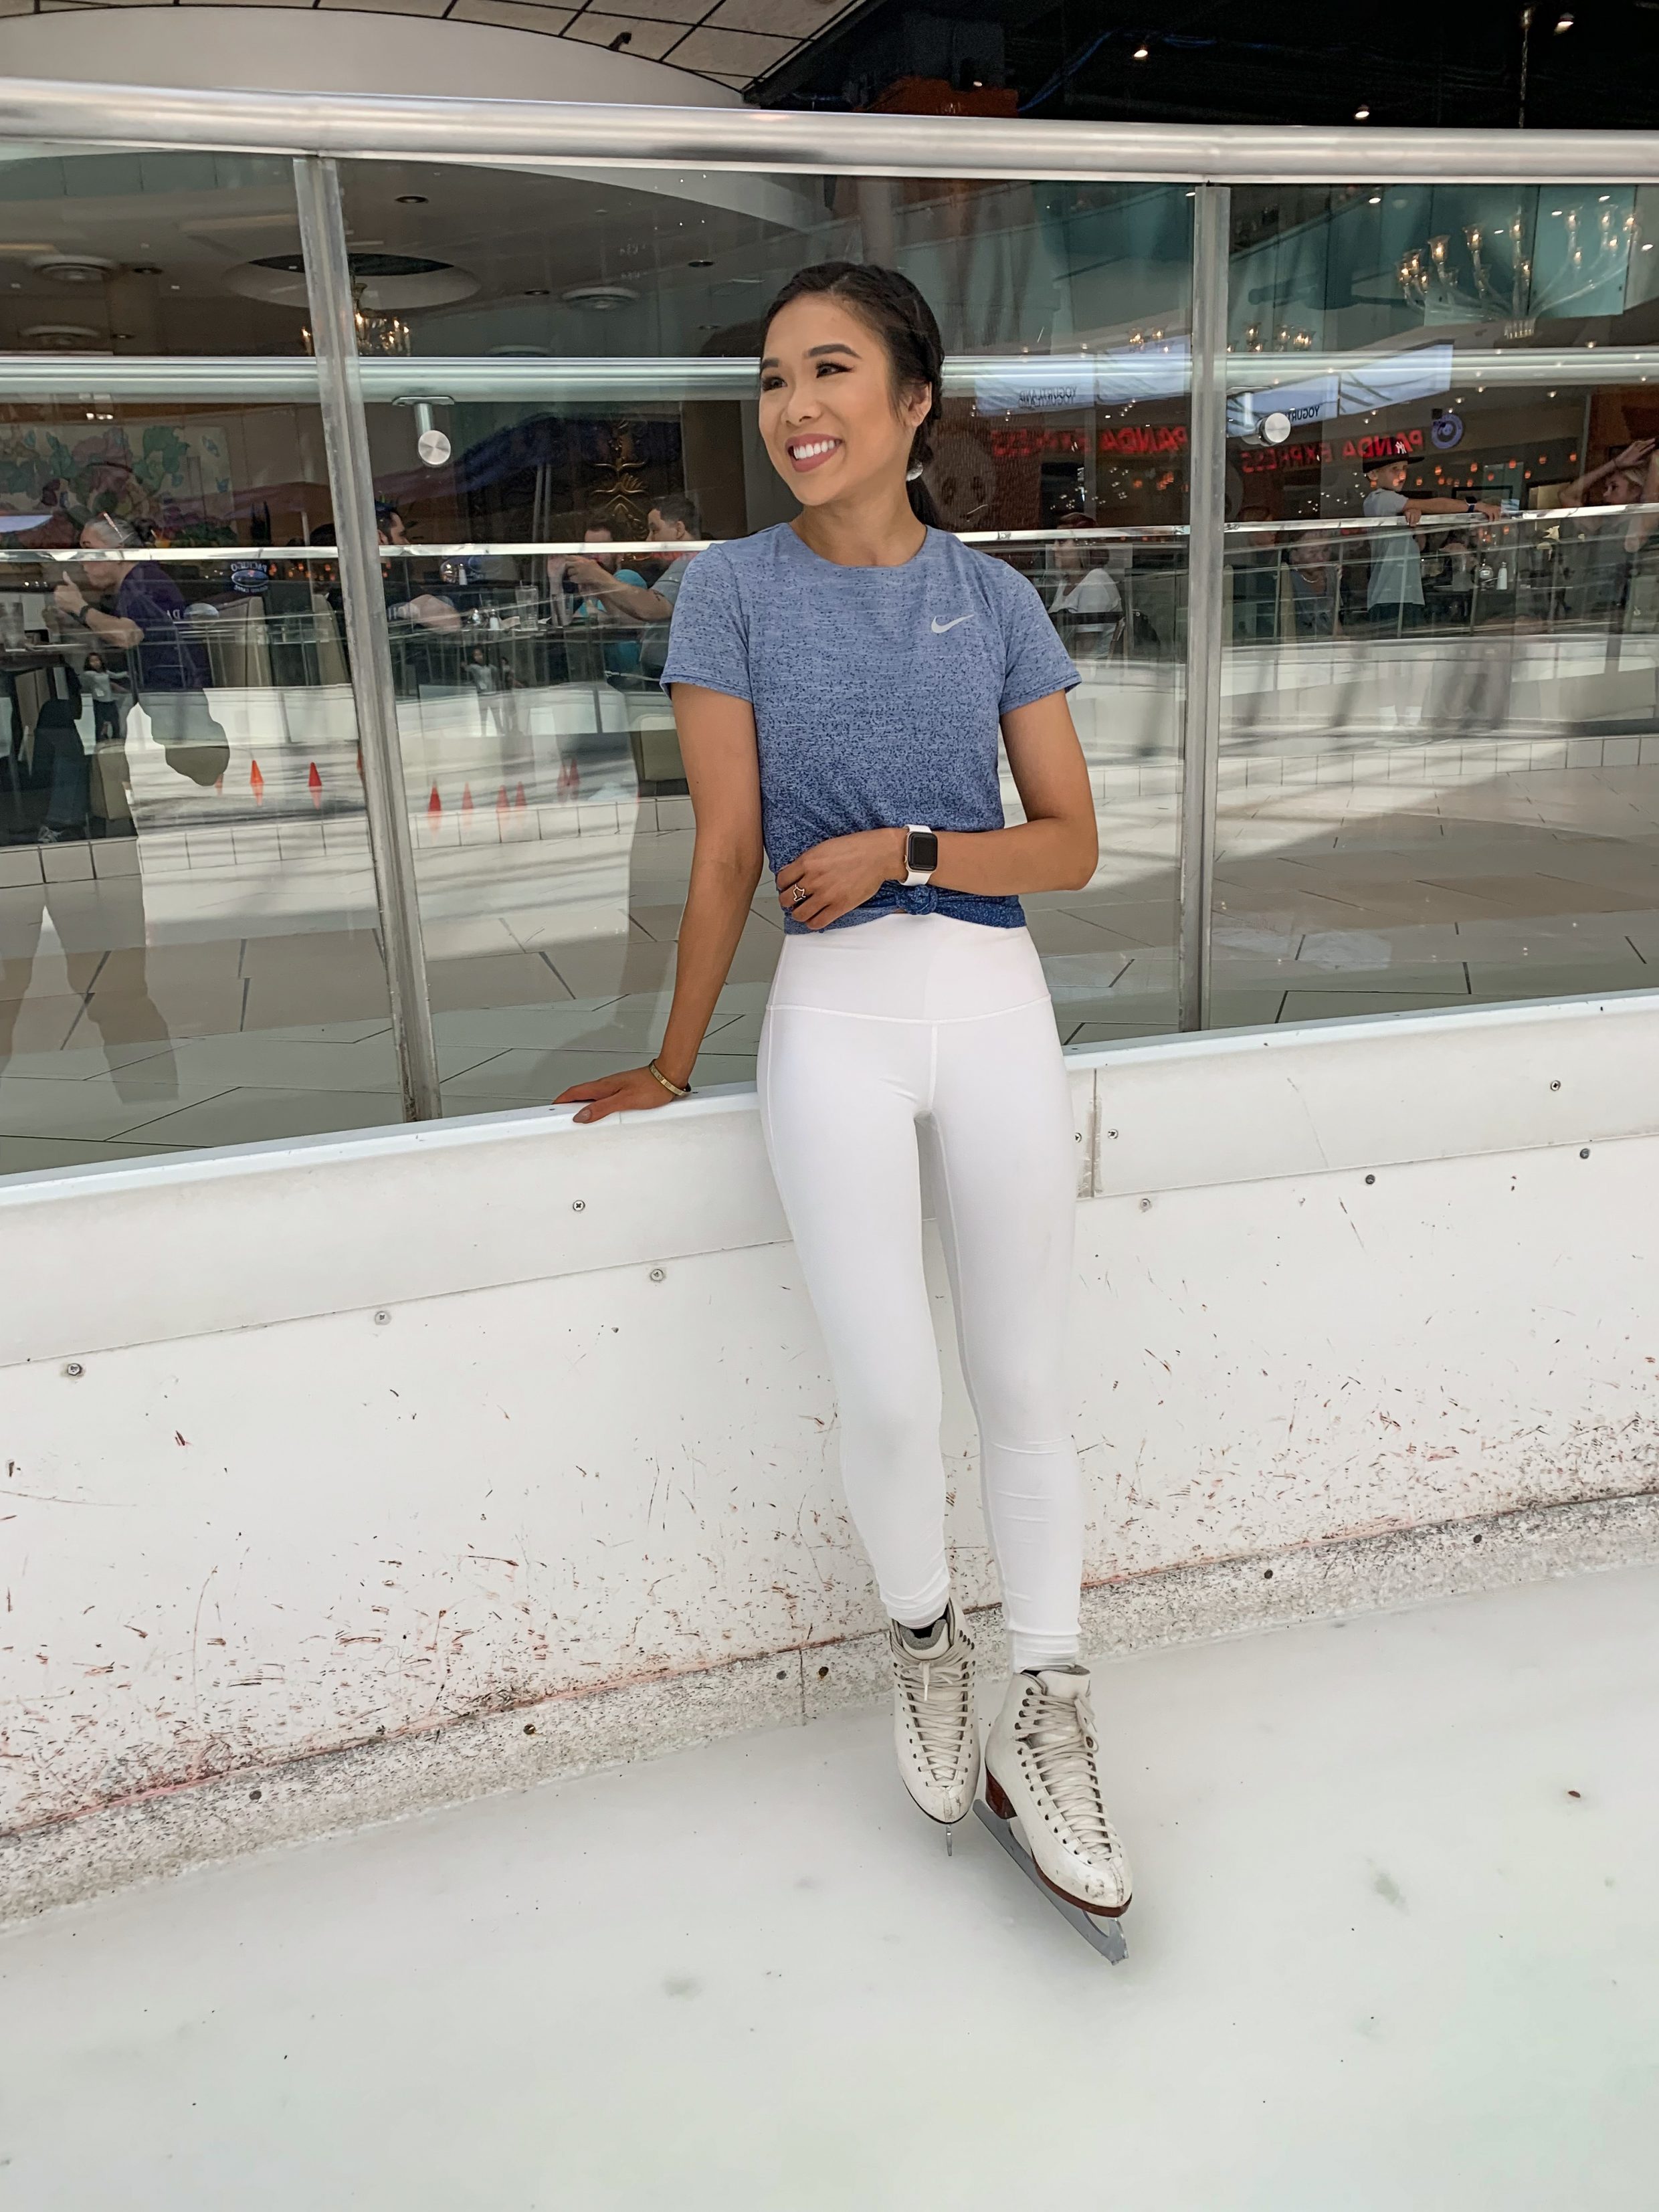 Ice skating outfit ideas